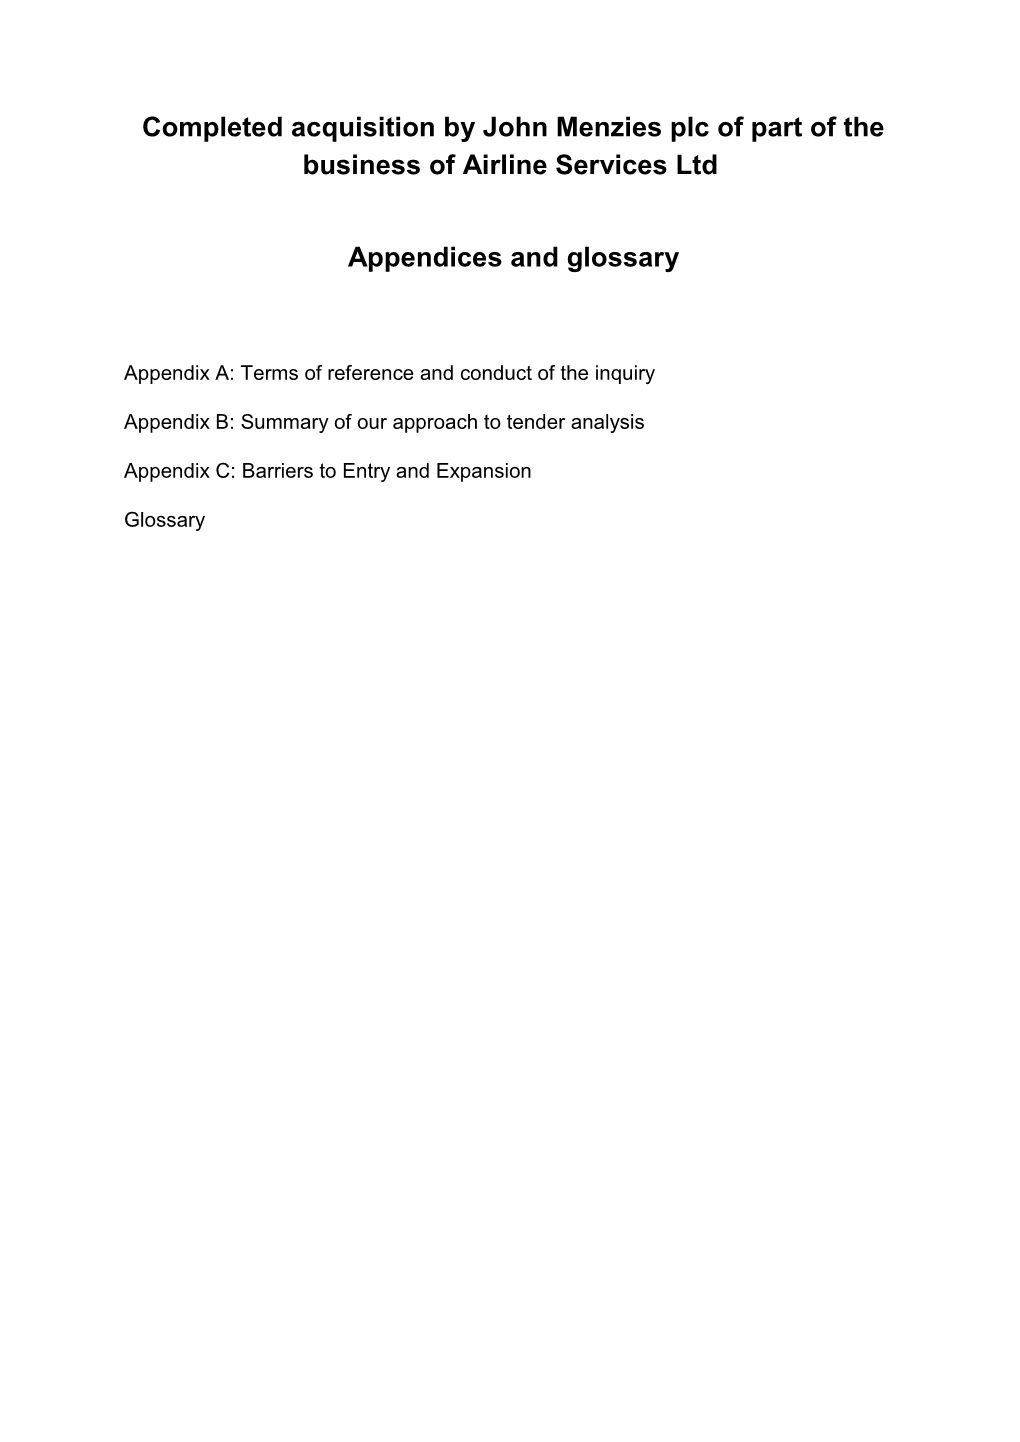 Appendices and Glossary